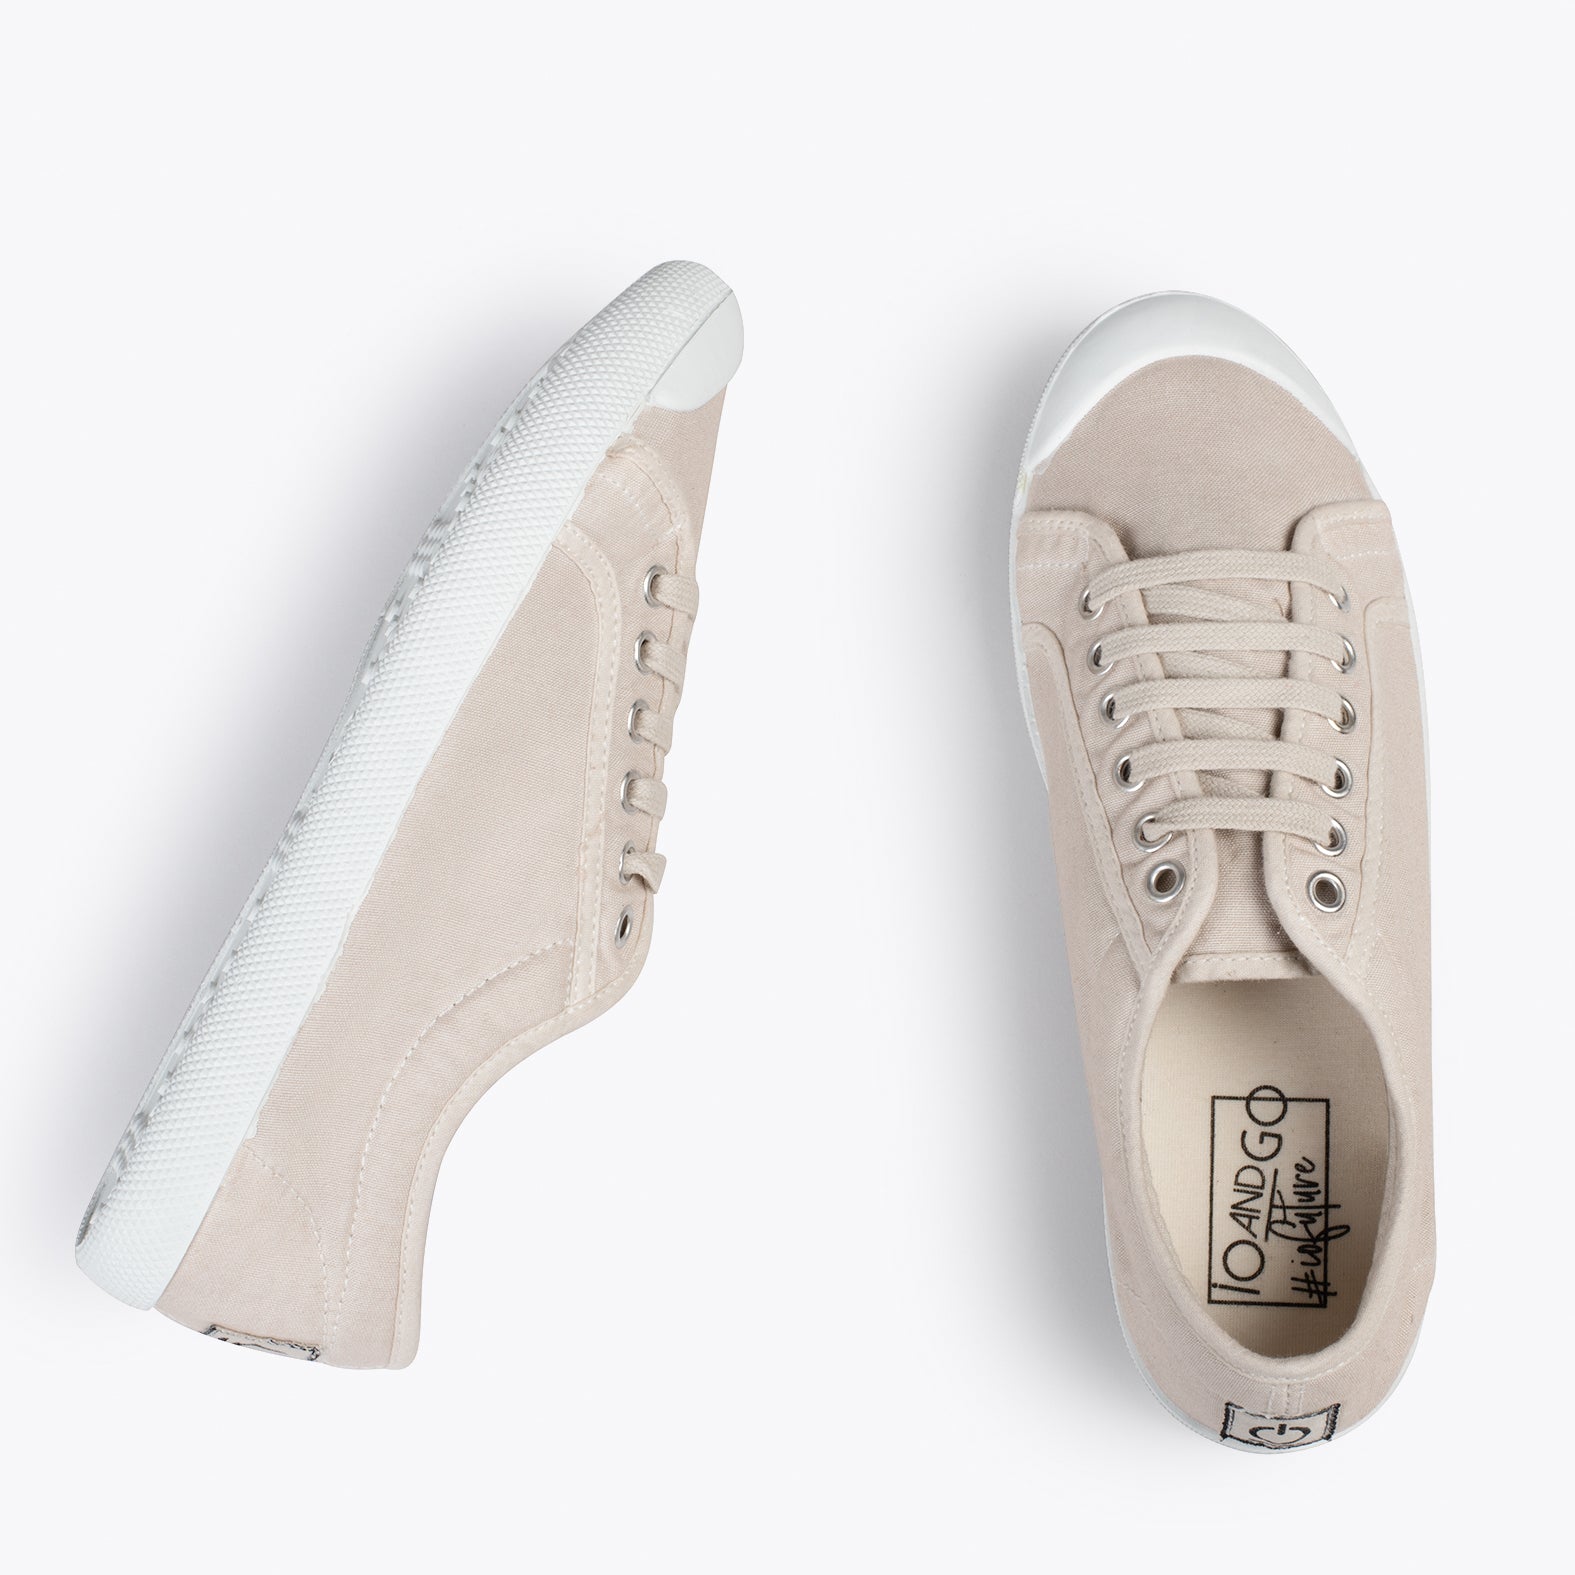 BAOBAB – BEIGE BCI cotton sneakers from IO&GO